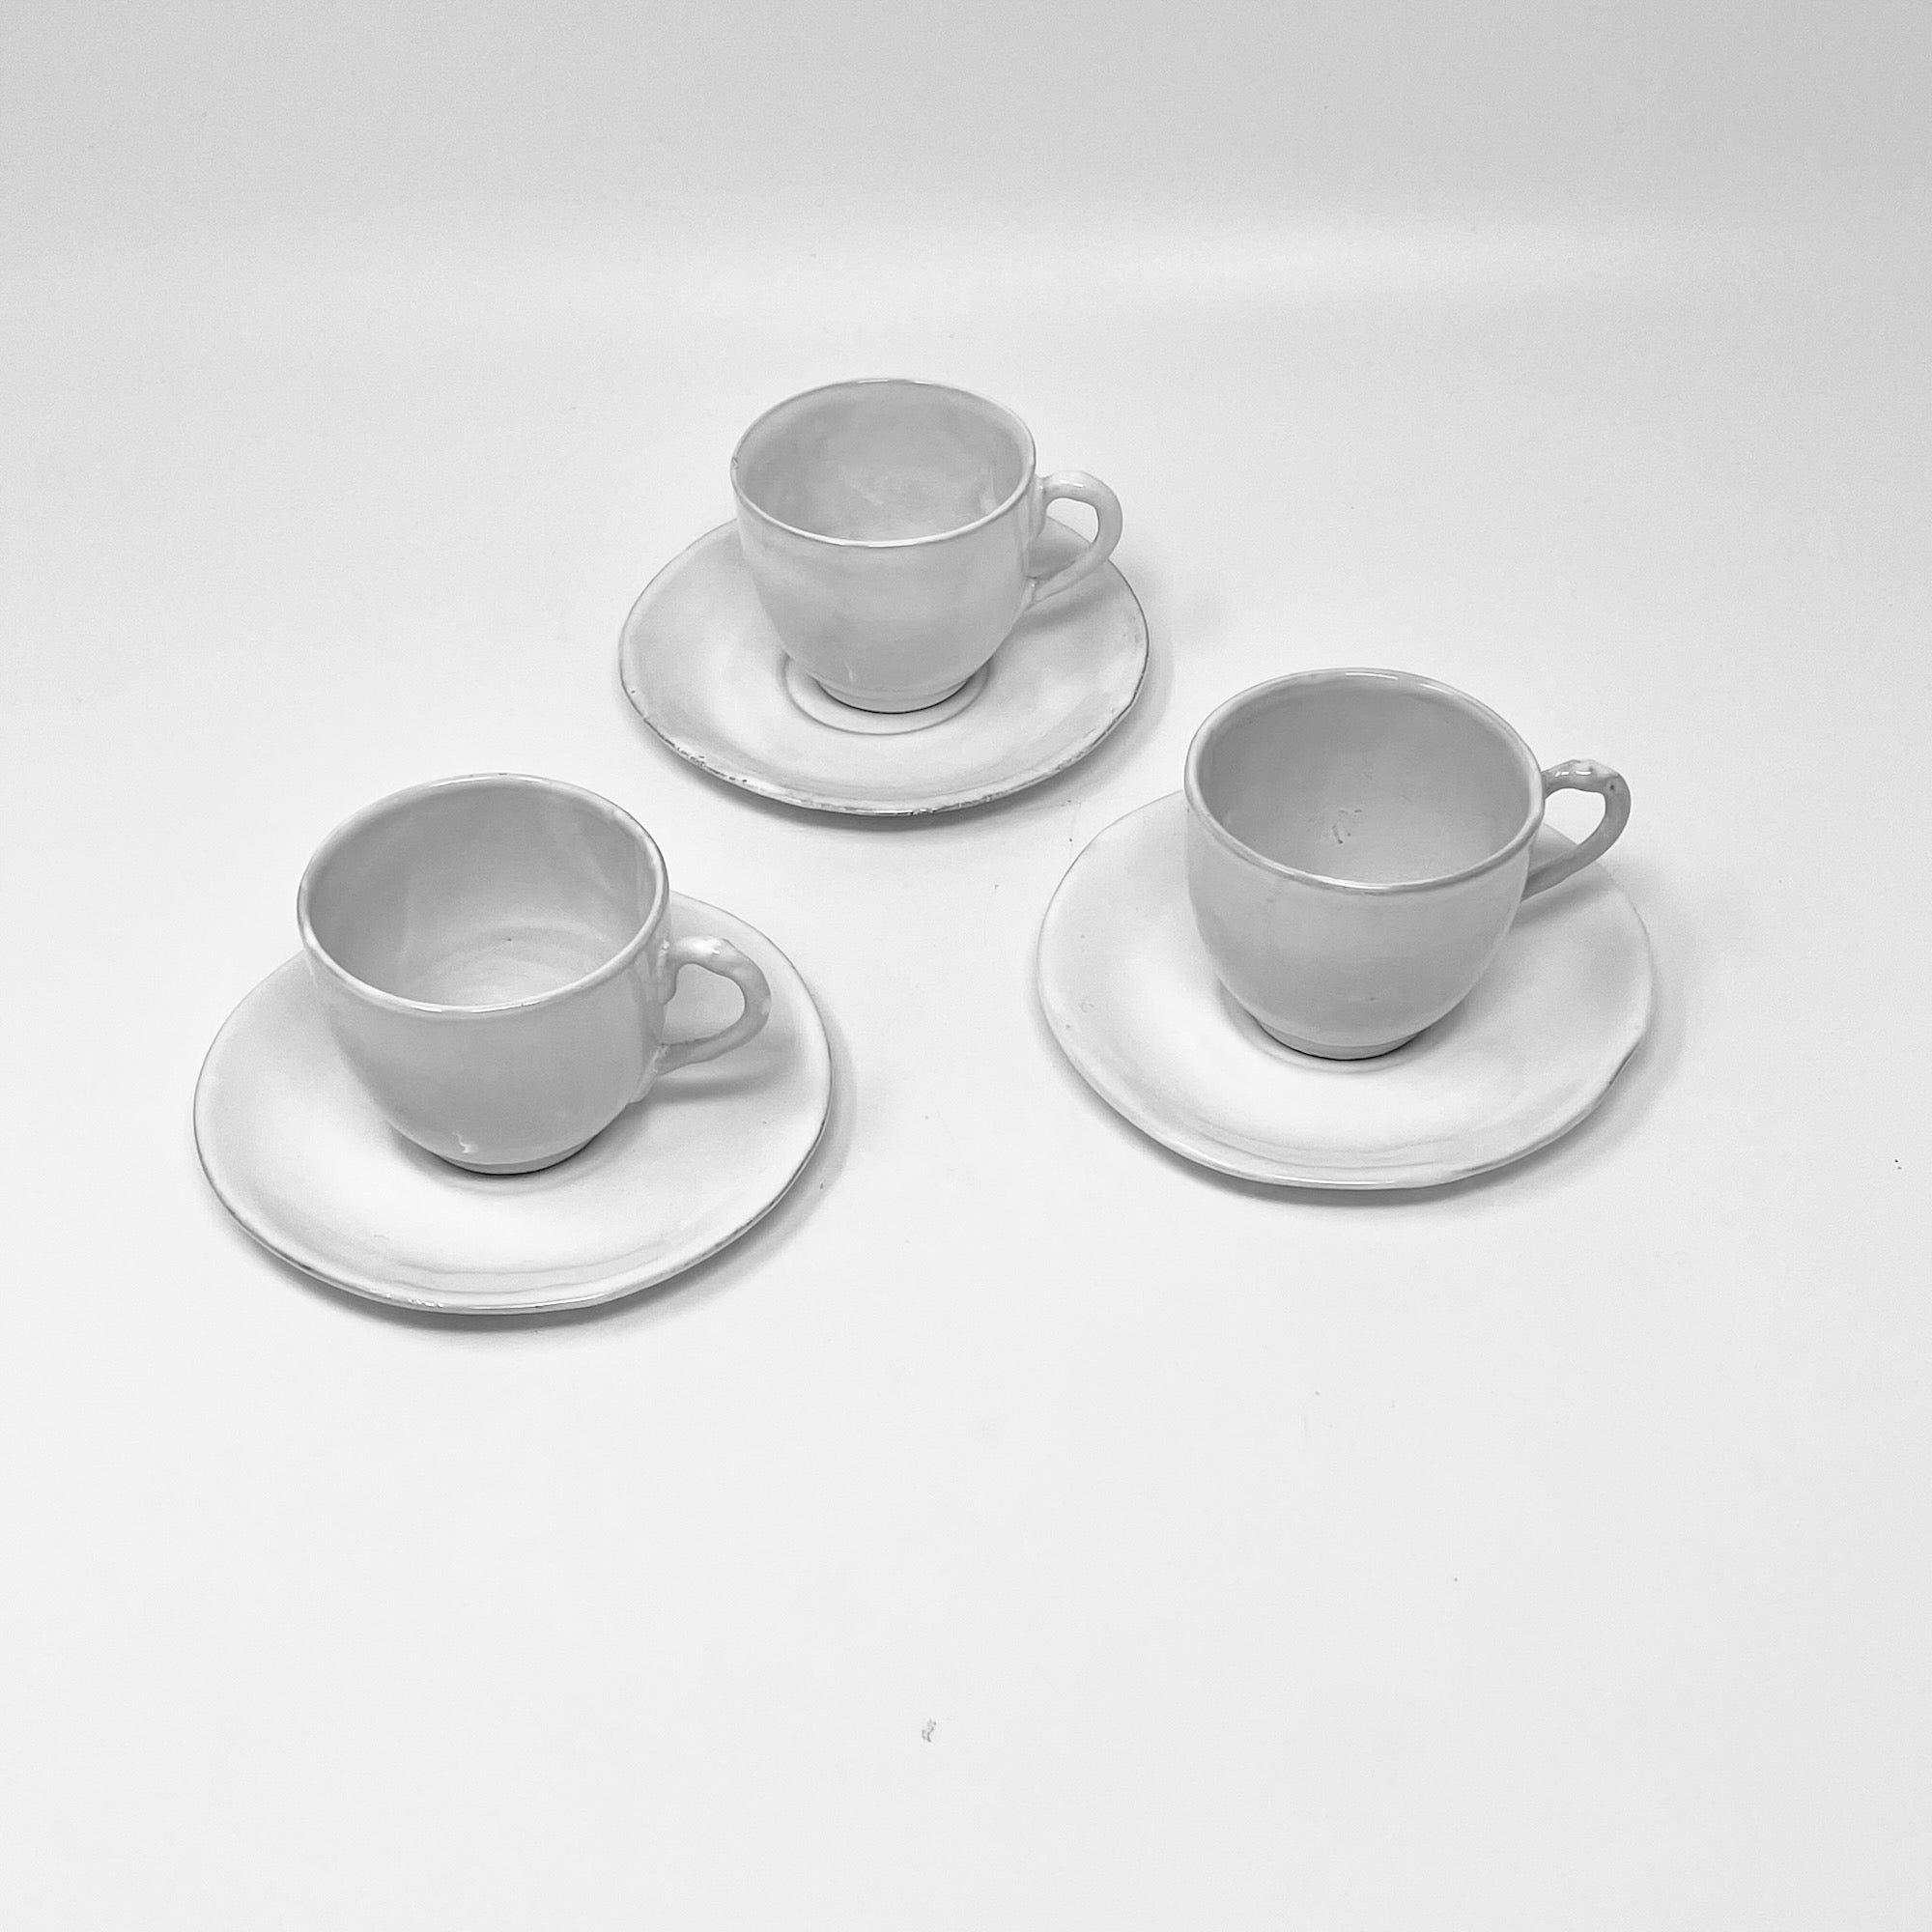 3x Cups and saucers set